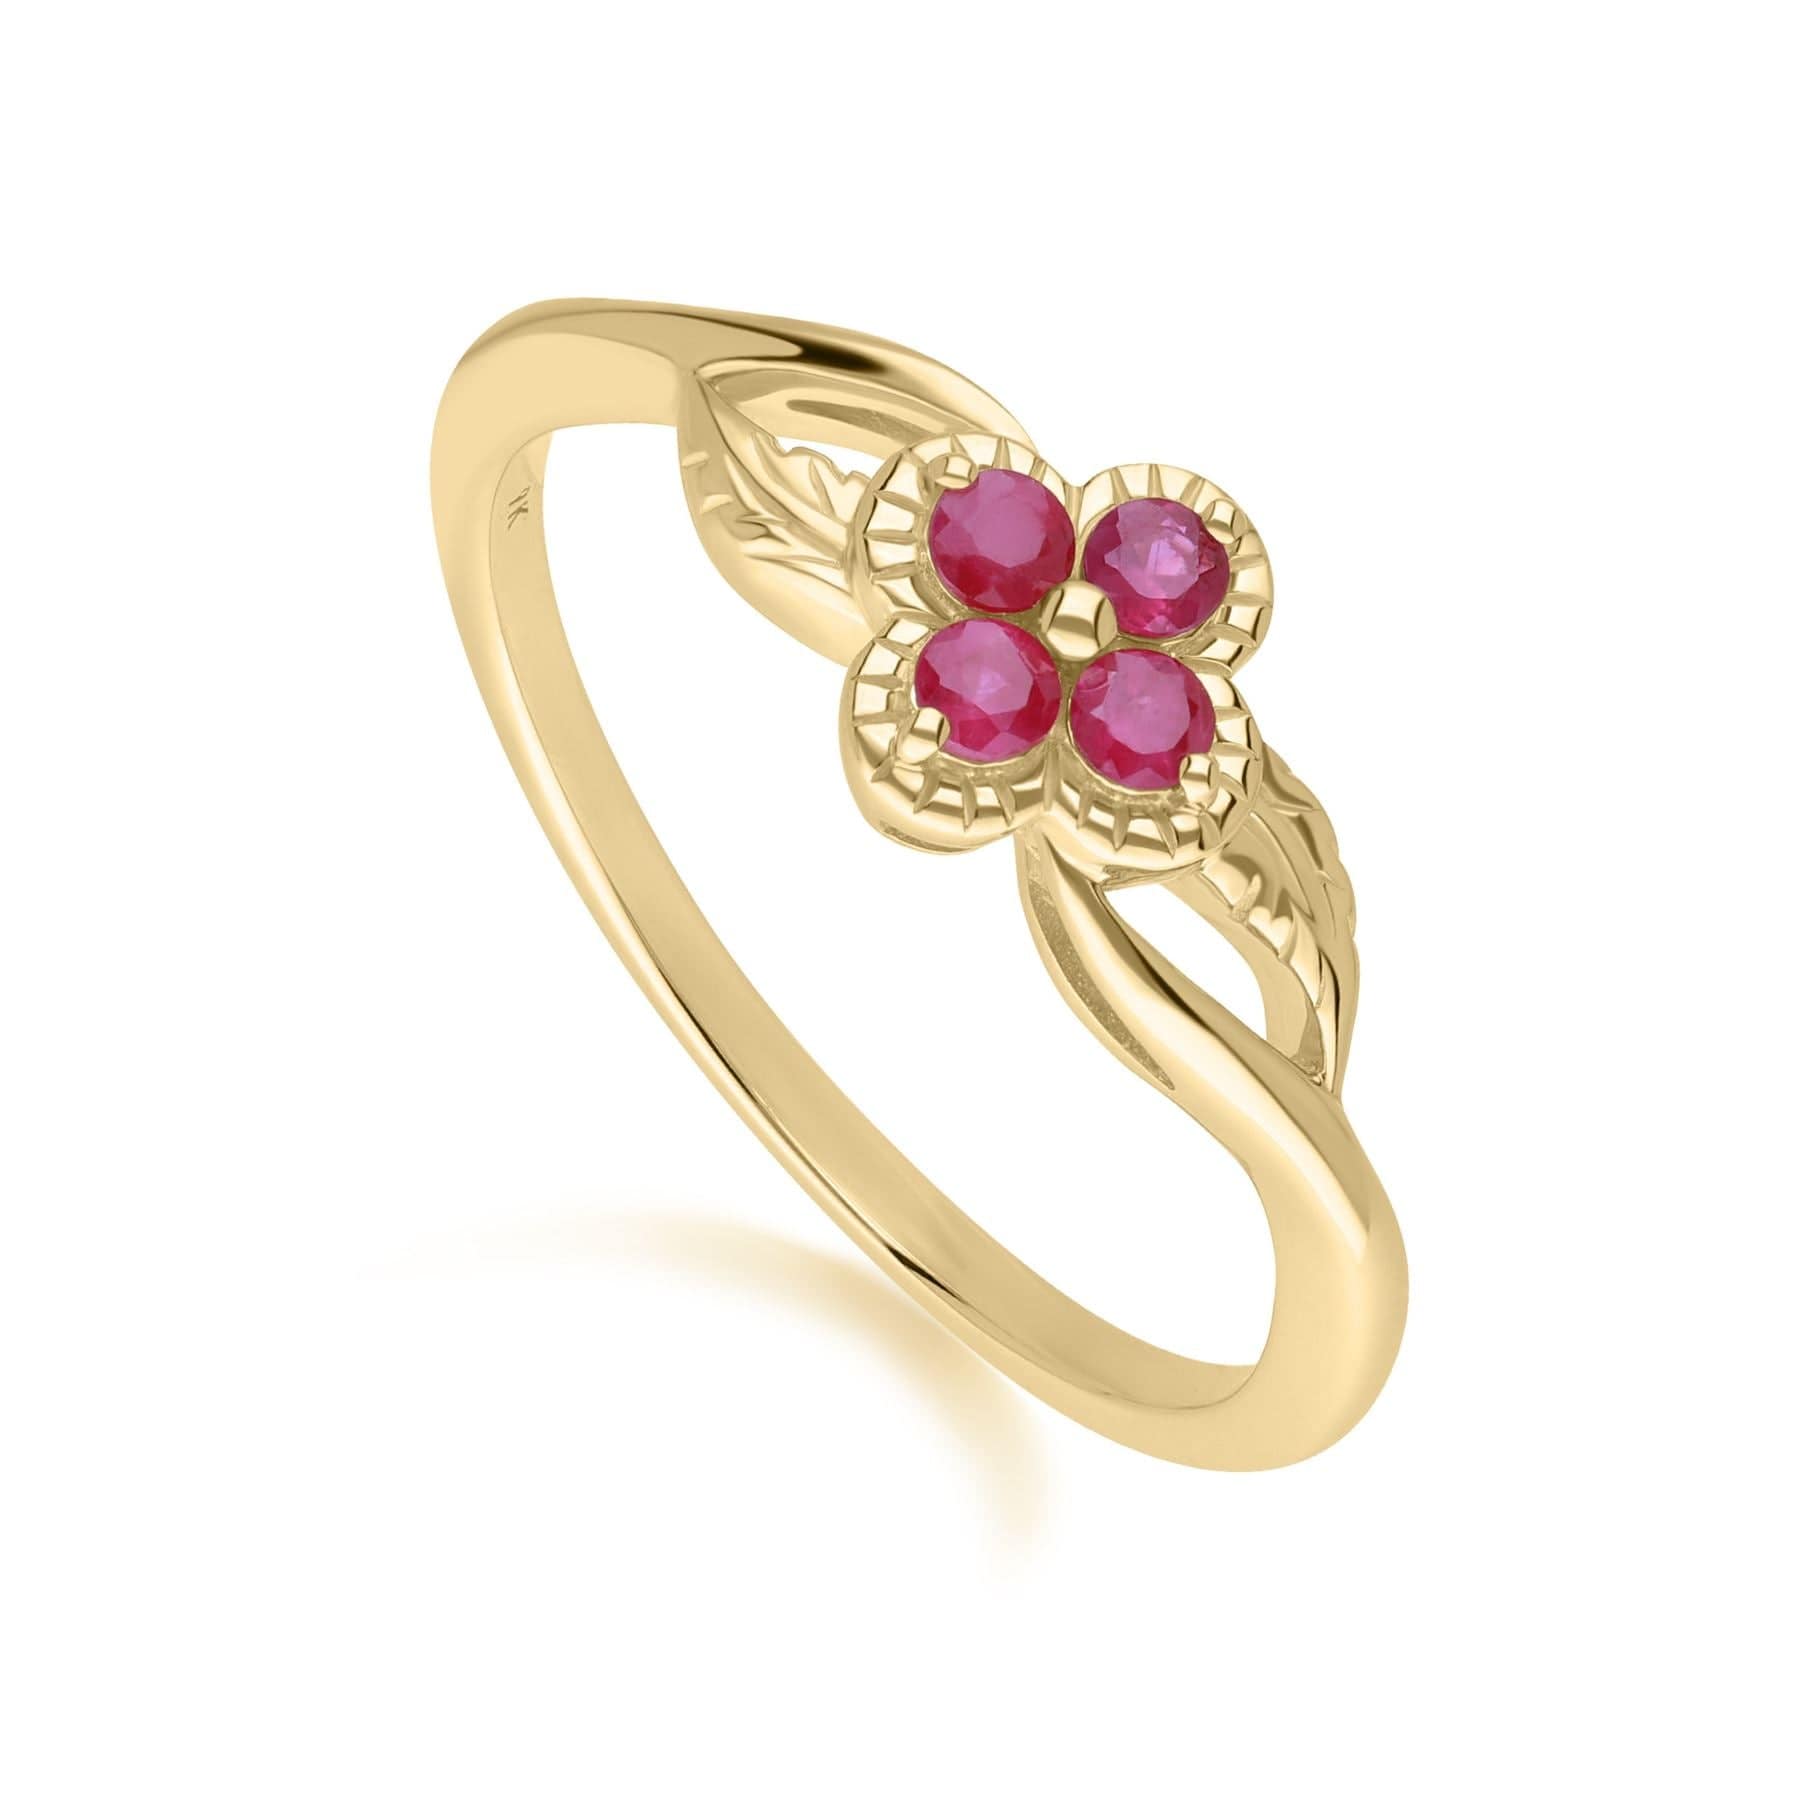 Floral Round Ruby Ring in 9ct Yellow Gold - Gemondo